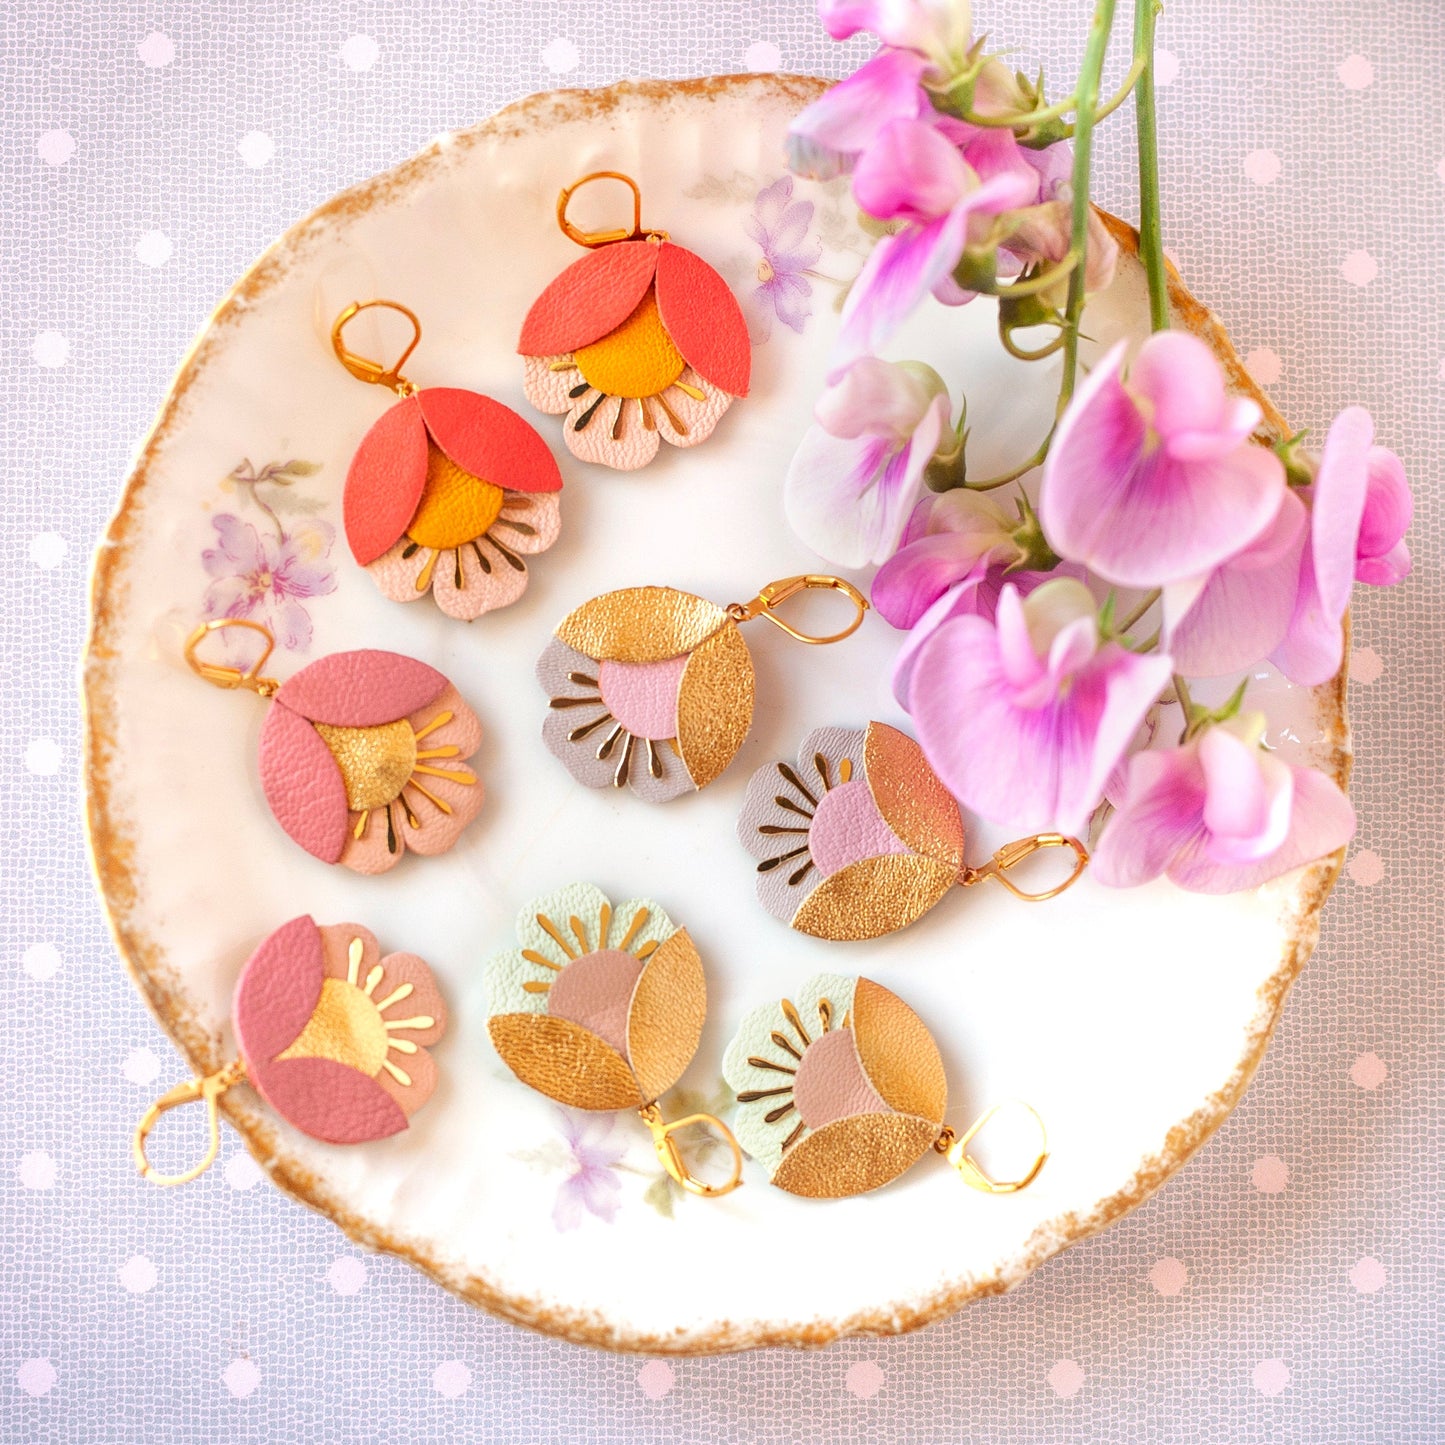 Cherry blossom earrings in pink and gold leather